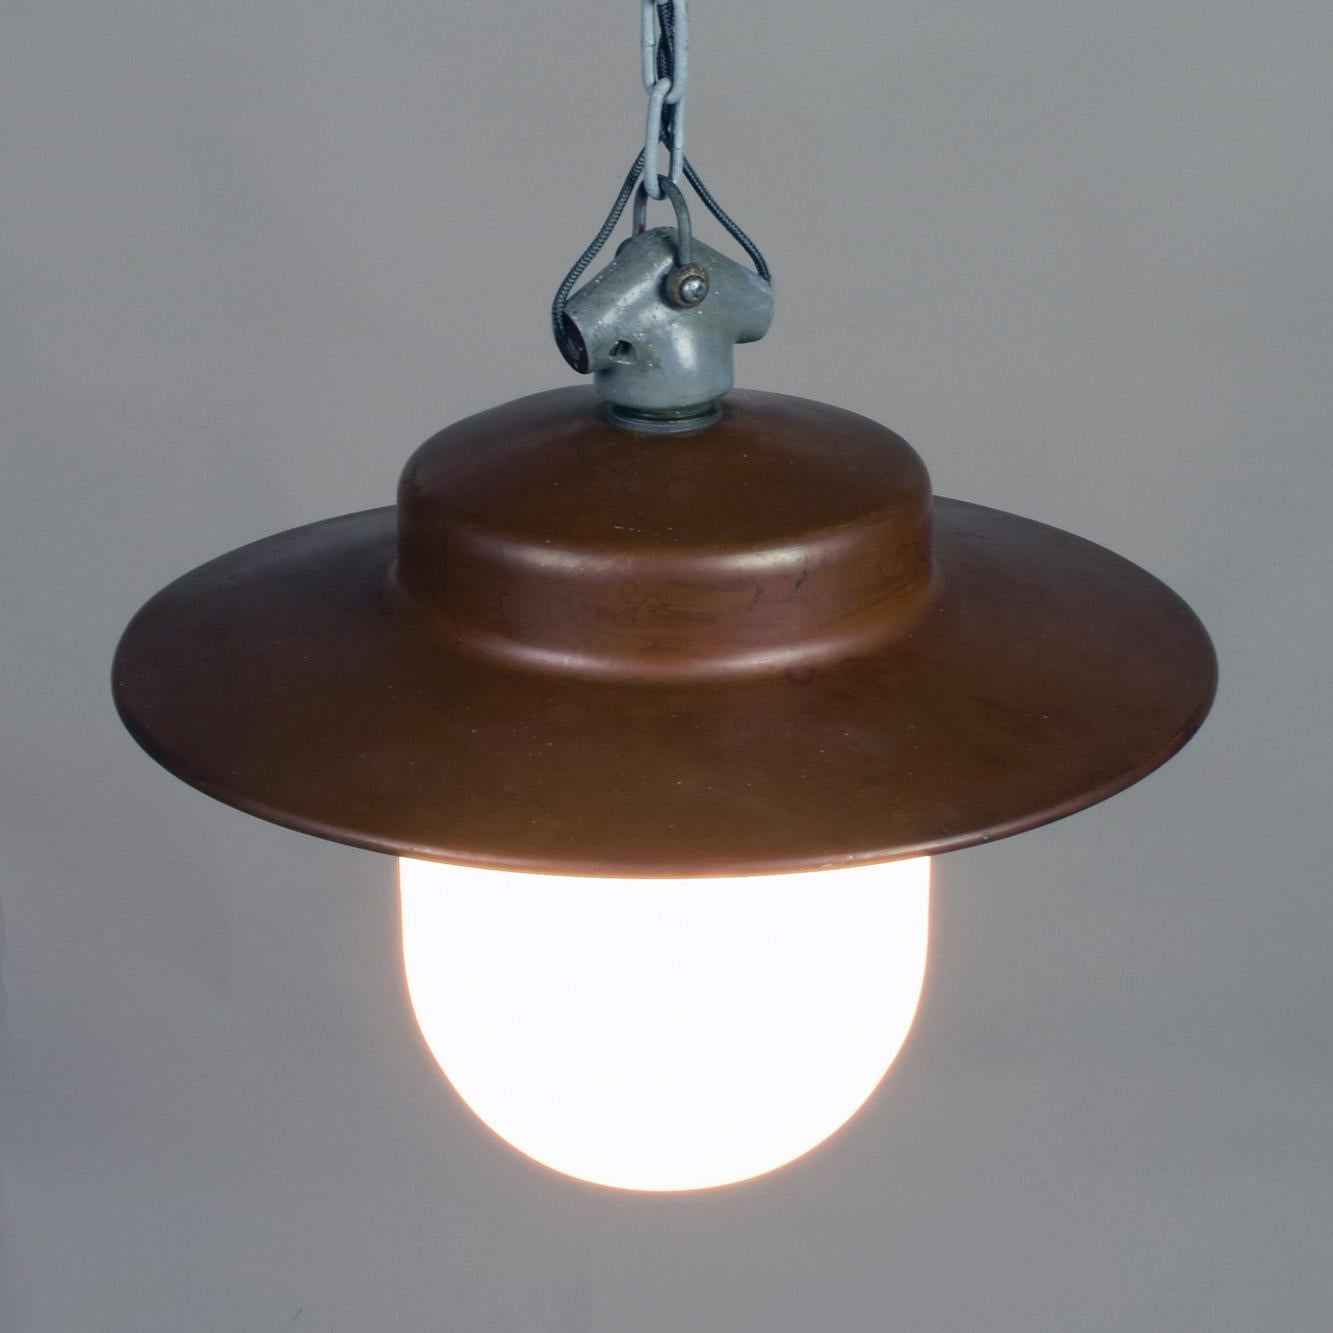 Copper B.A.G. Turgi Industrial 1930s Bauhaus Pendant Lamp Attributed to Hin Bredendieck For Sale